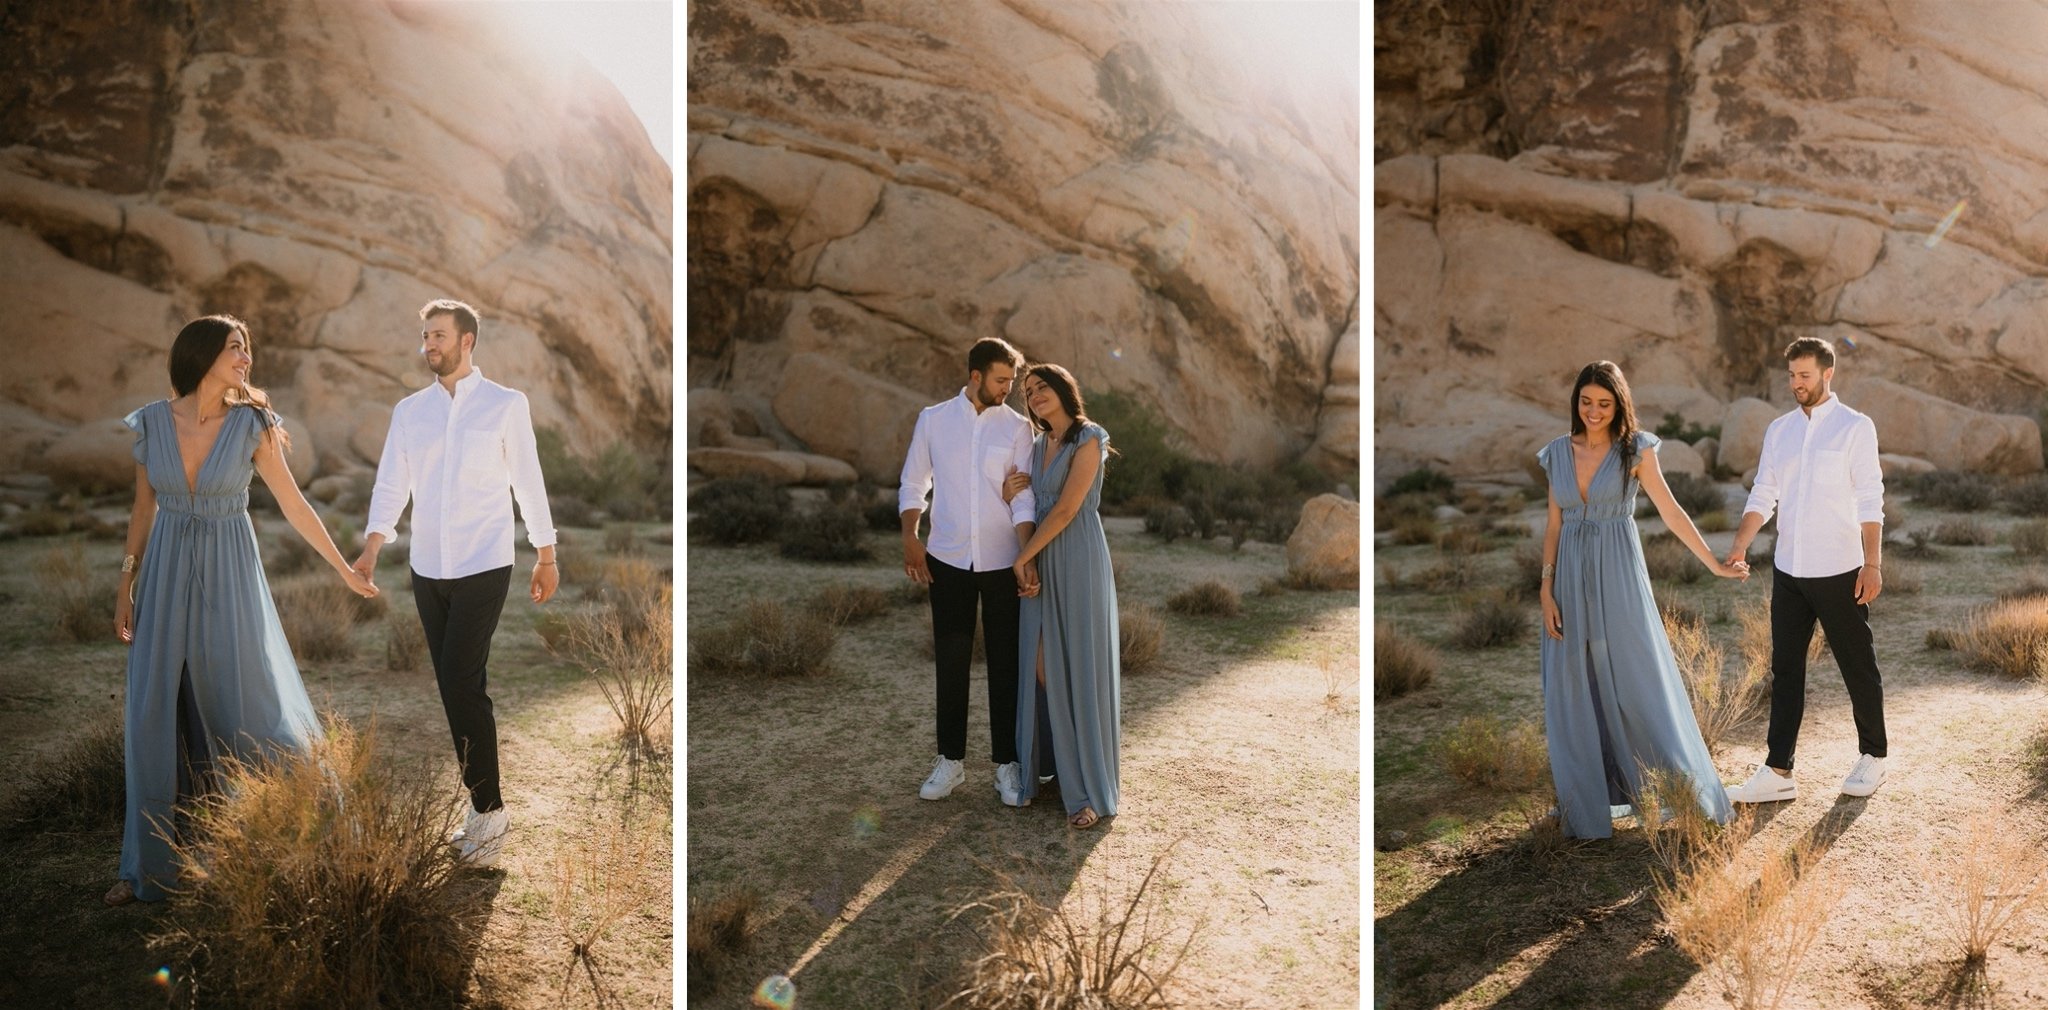 Joshua Tree Couples Session Surprise Proposal - Will Khoury Photography_29.jpg